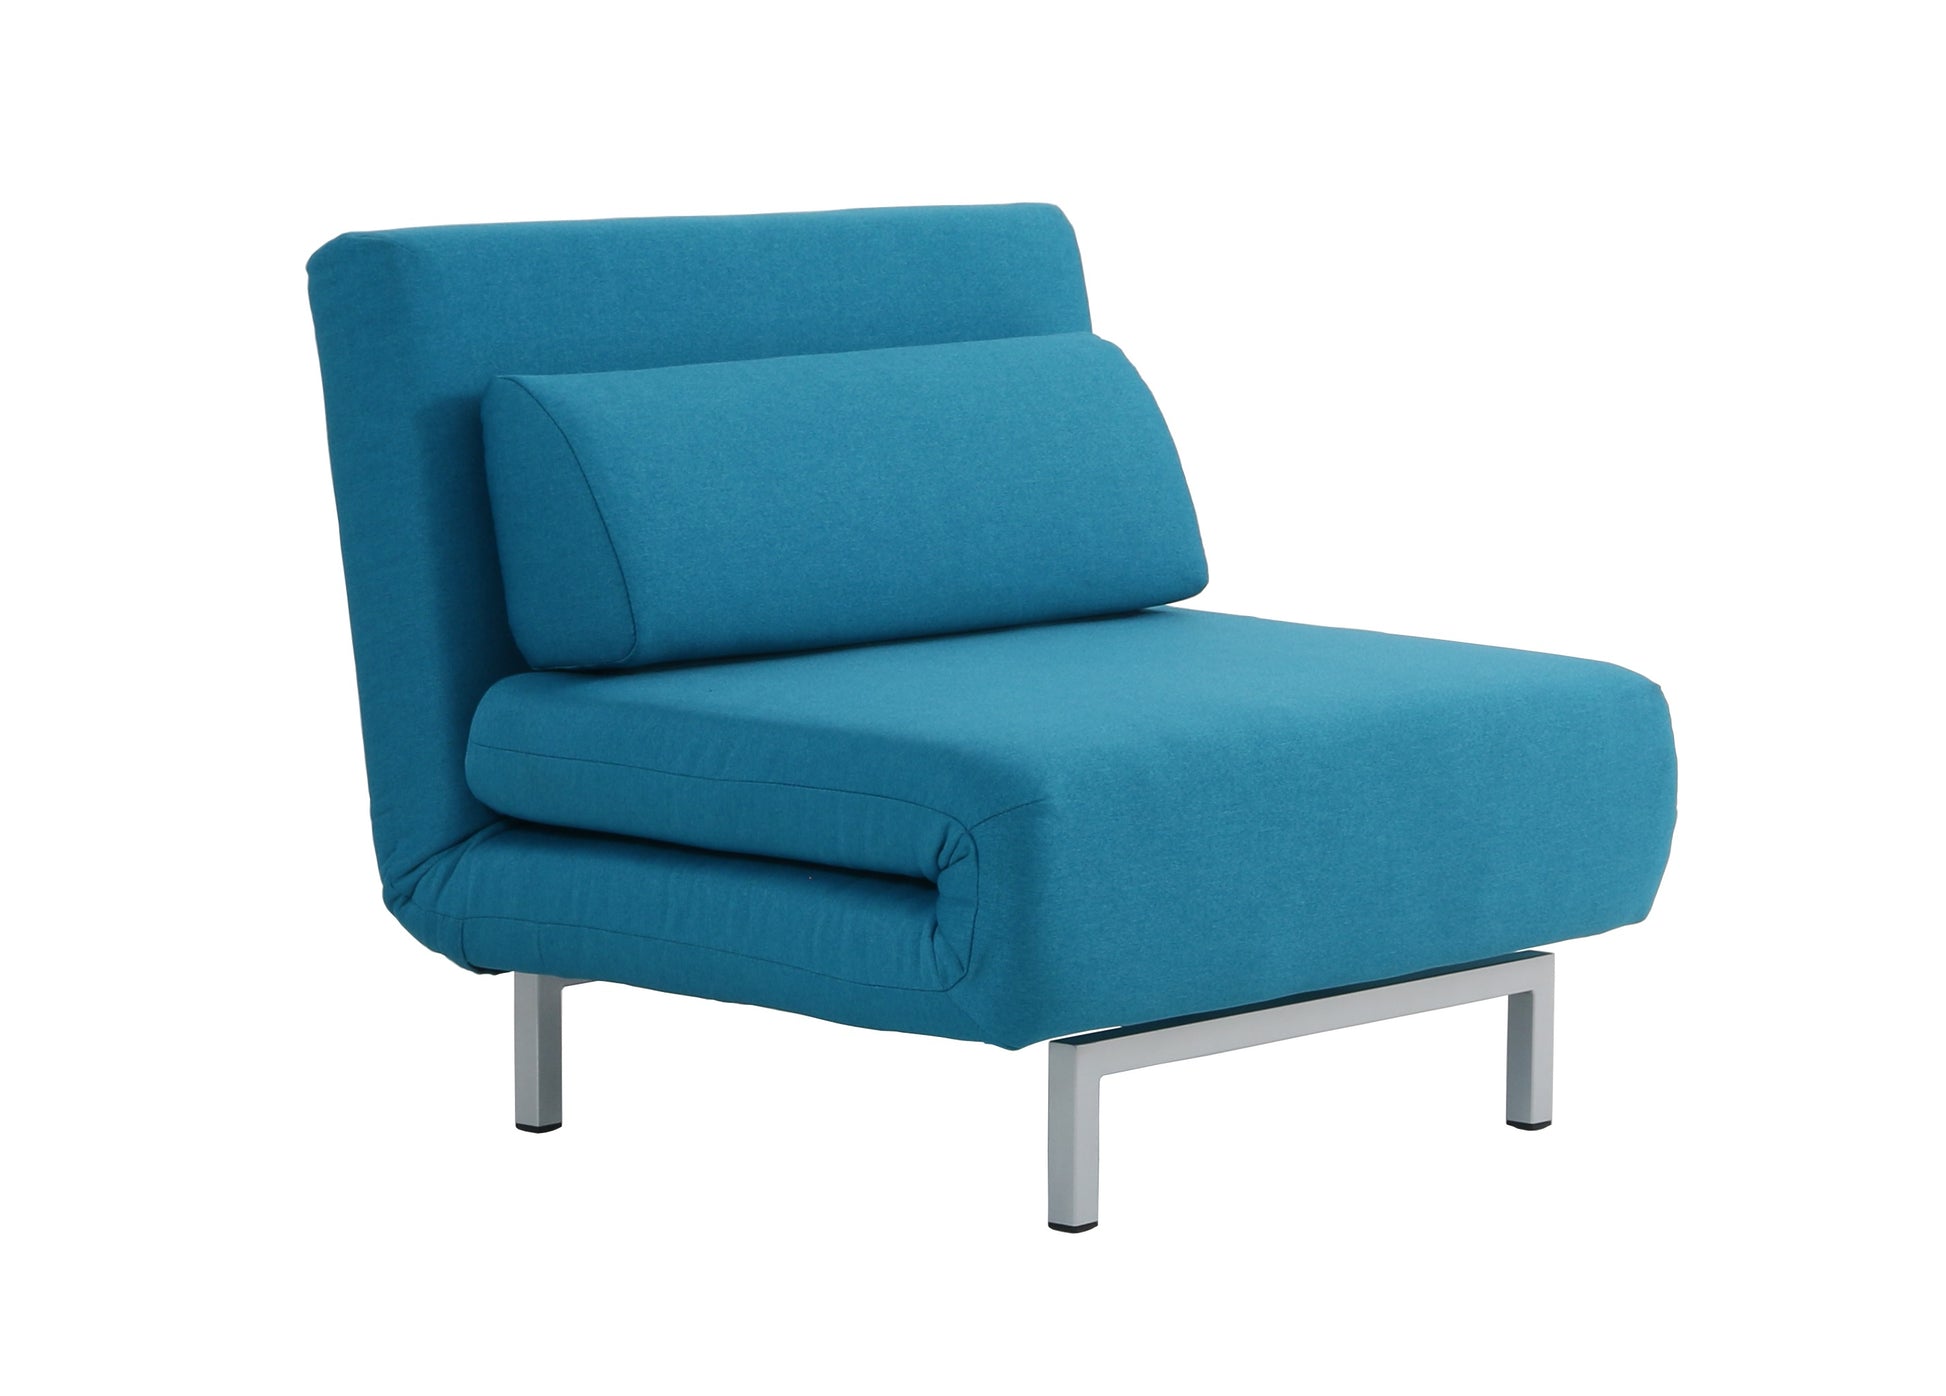 Premium Chair Bed Lk06-1 Teal Fabric by JM